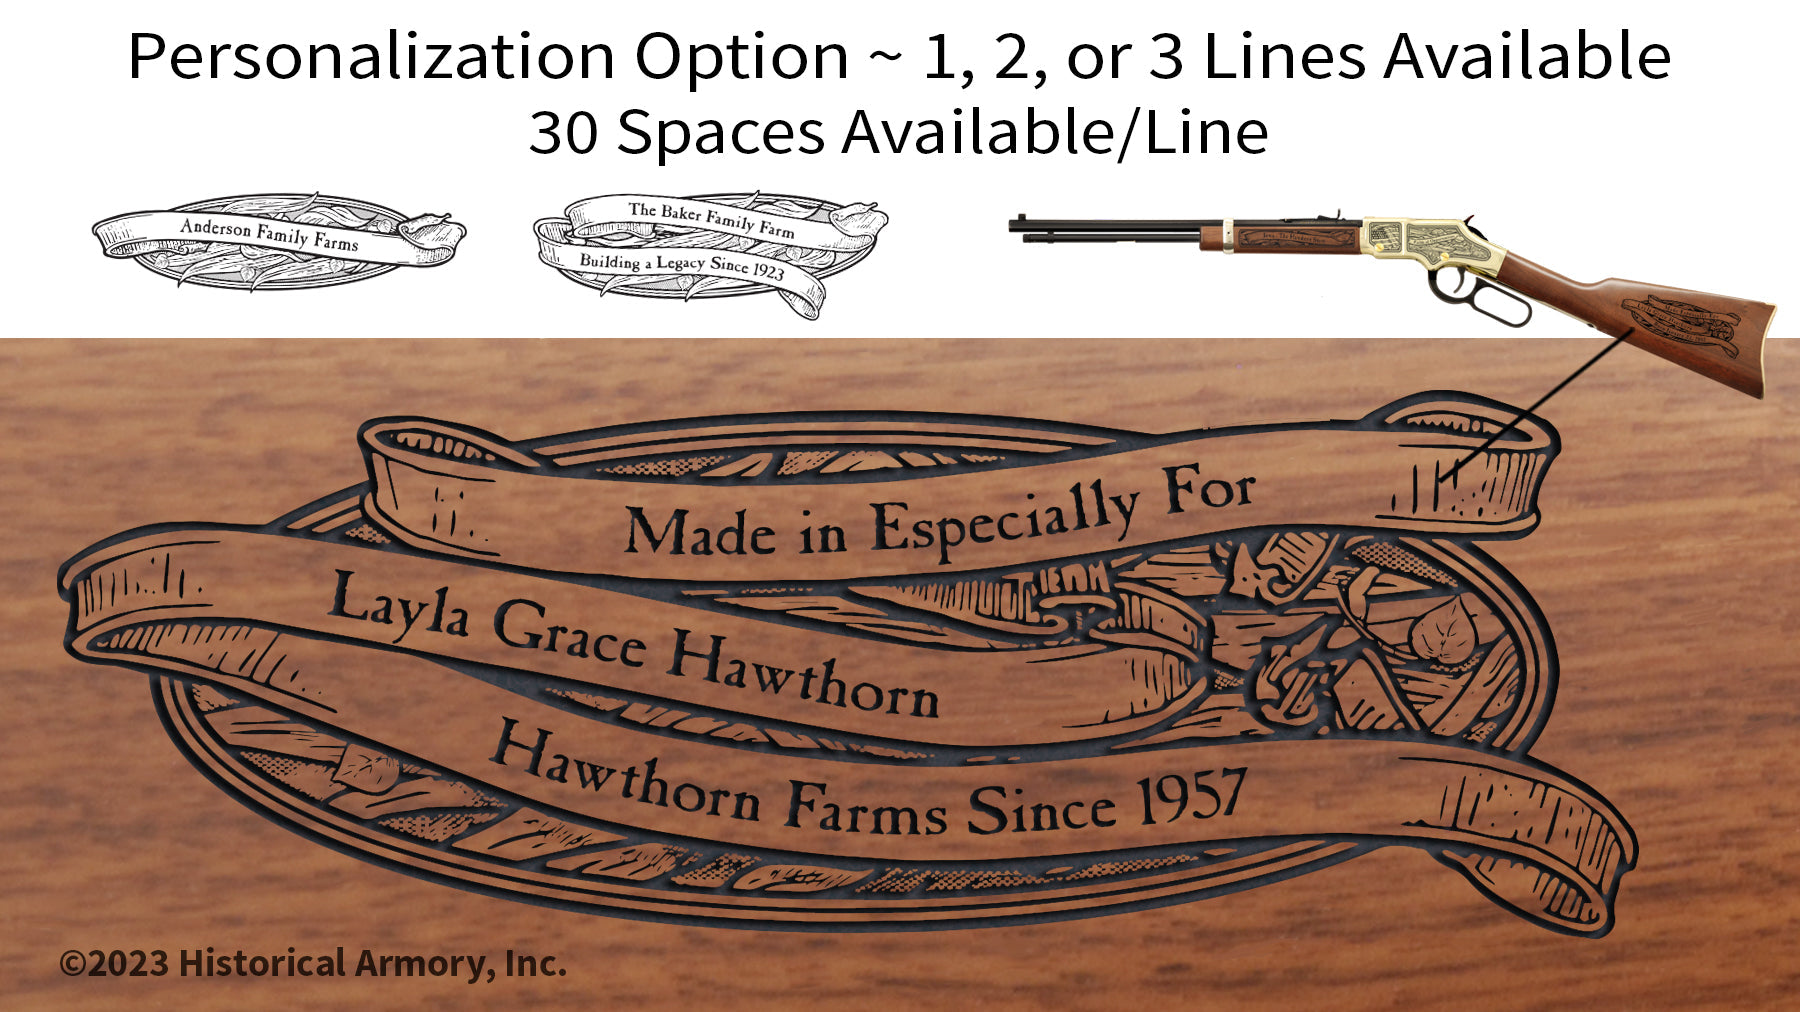 Georgia Agricultural Heritage Engraved Rifle Personalization